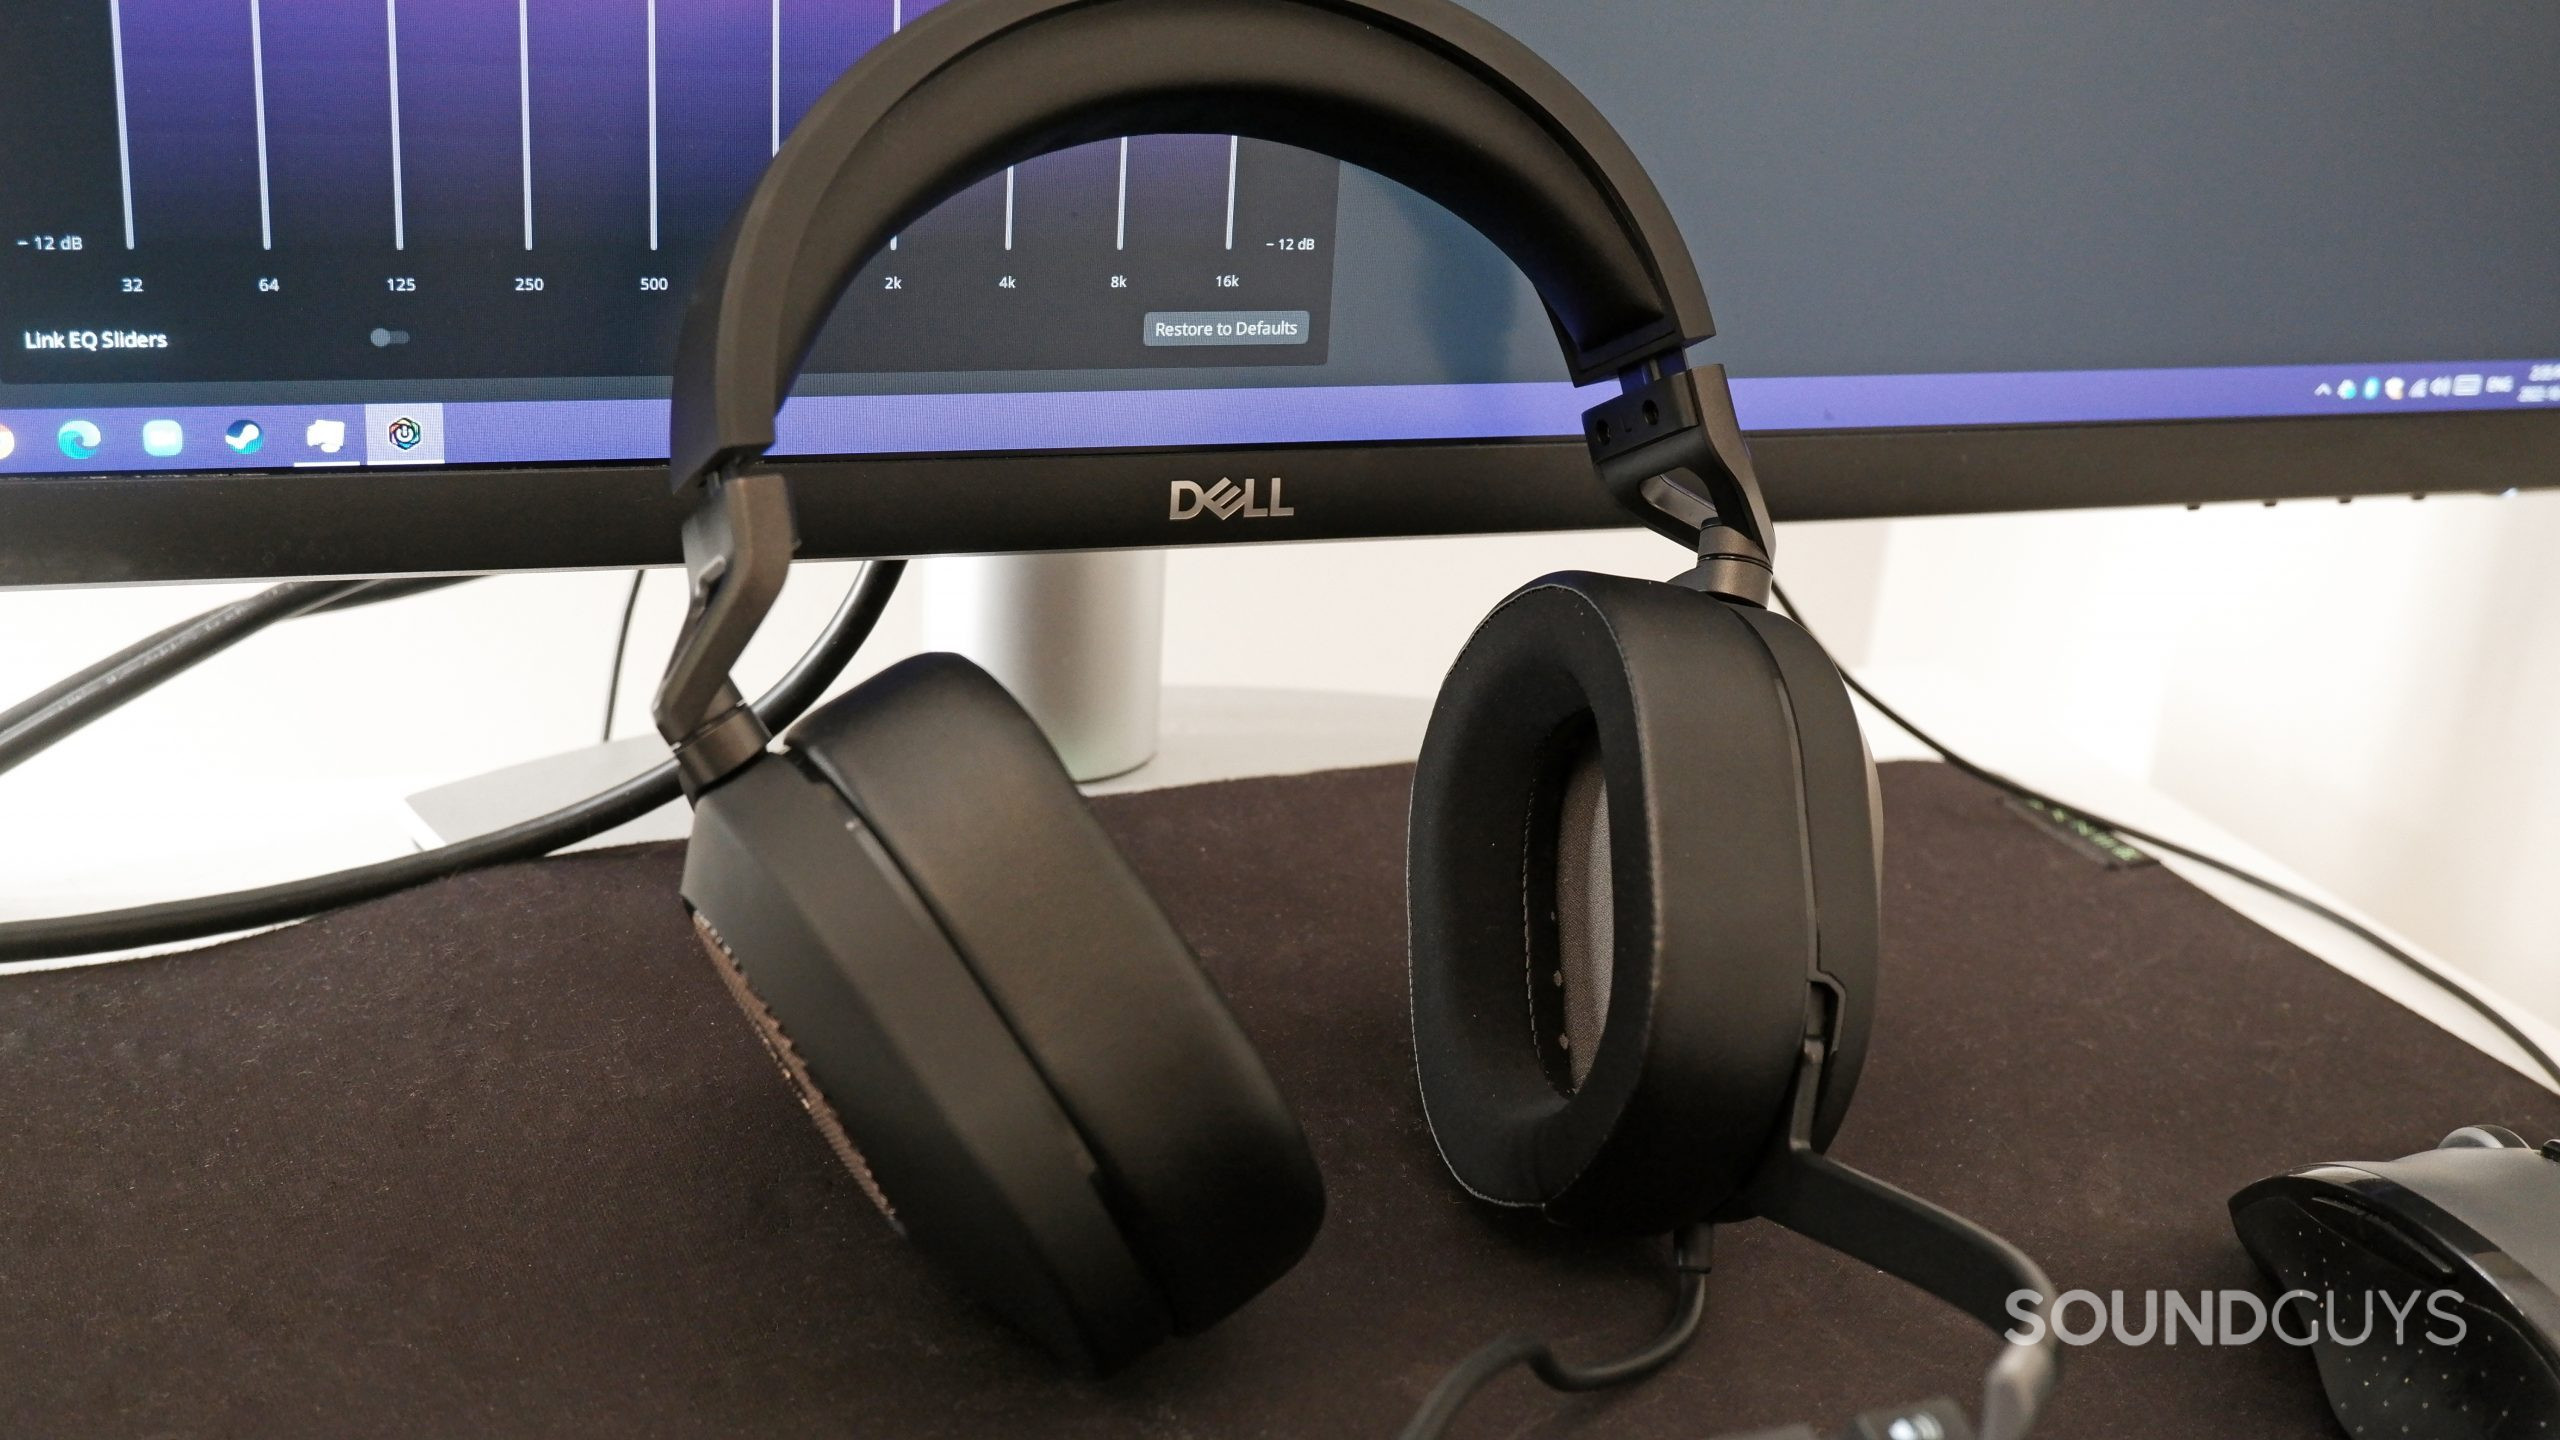 The Corsair HS65 Surround resting against a computer monitor with the iCue software running.